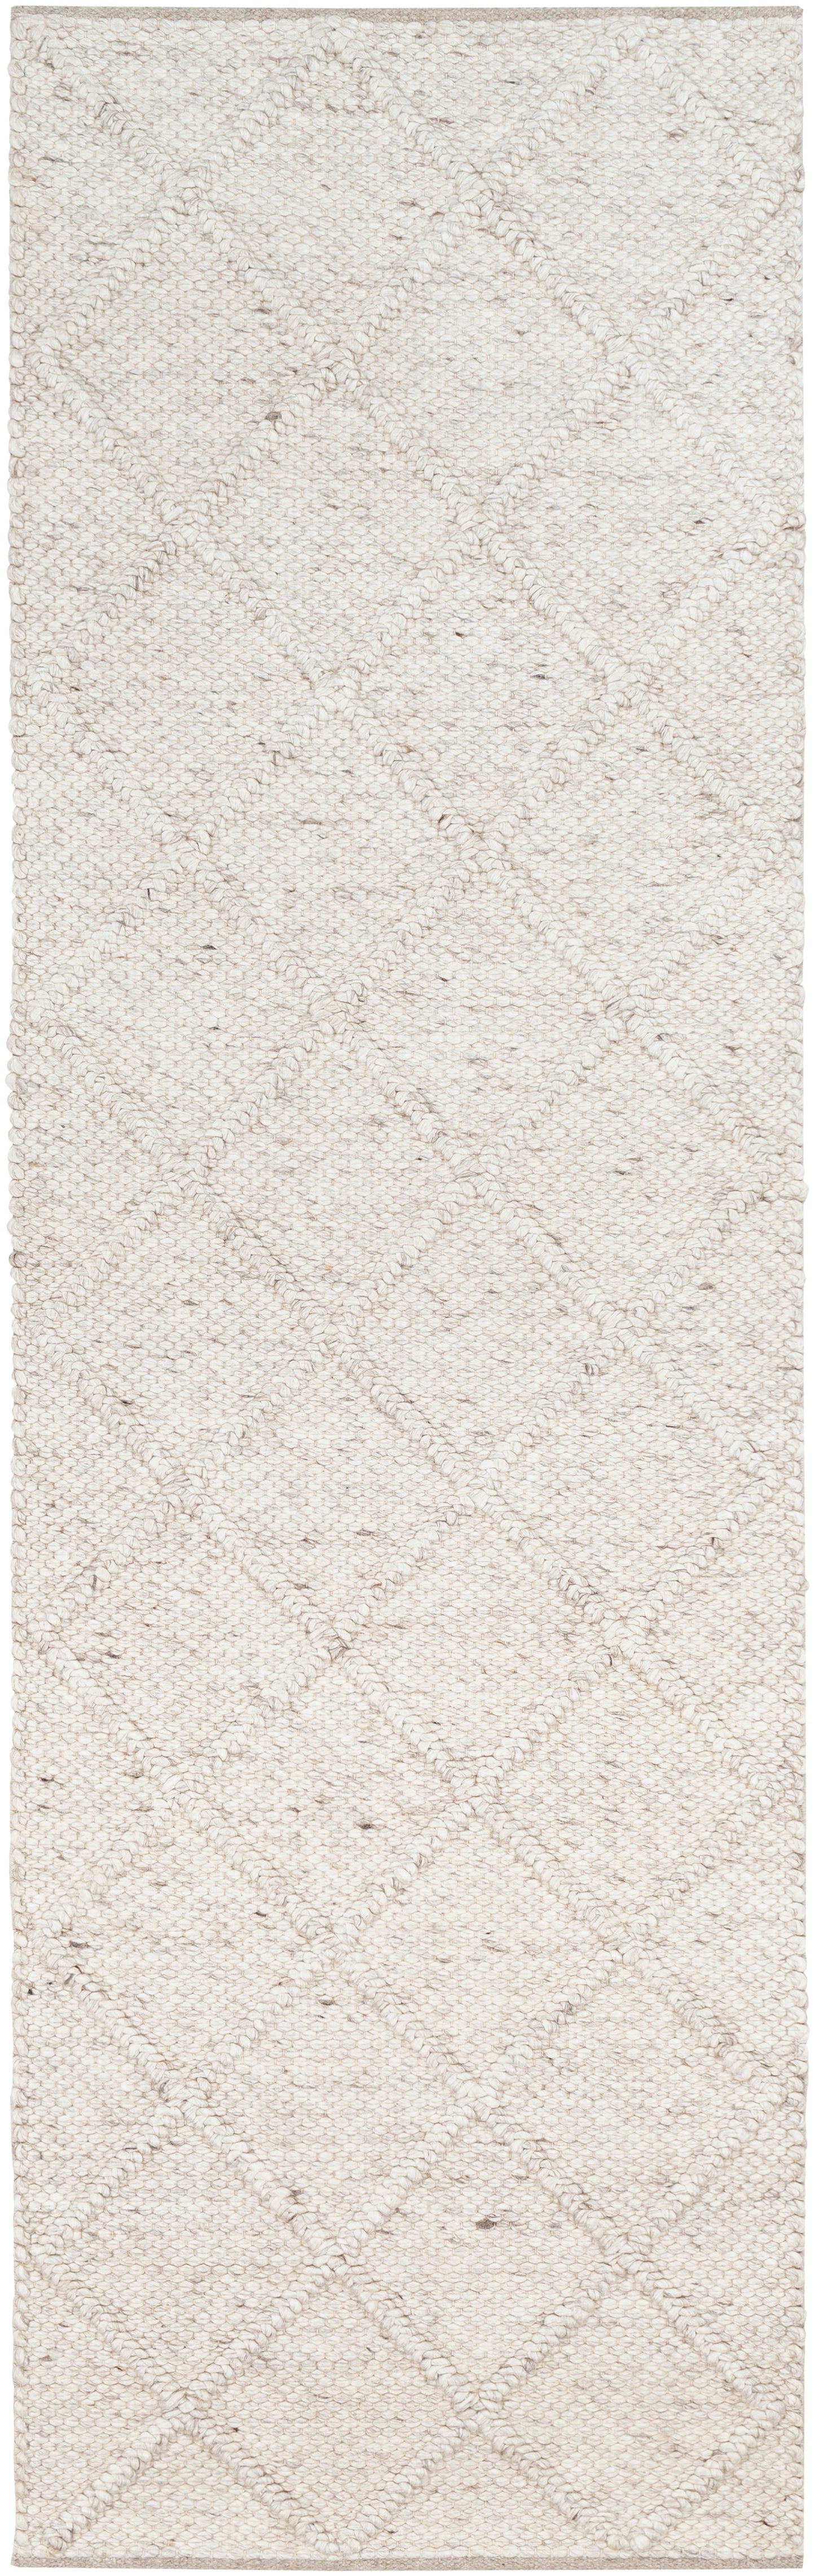 Napels 23227 Hand Woven Wool Indoor Area Rug by Surya Rugs